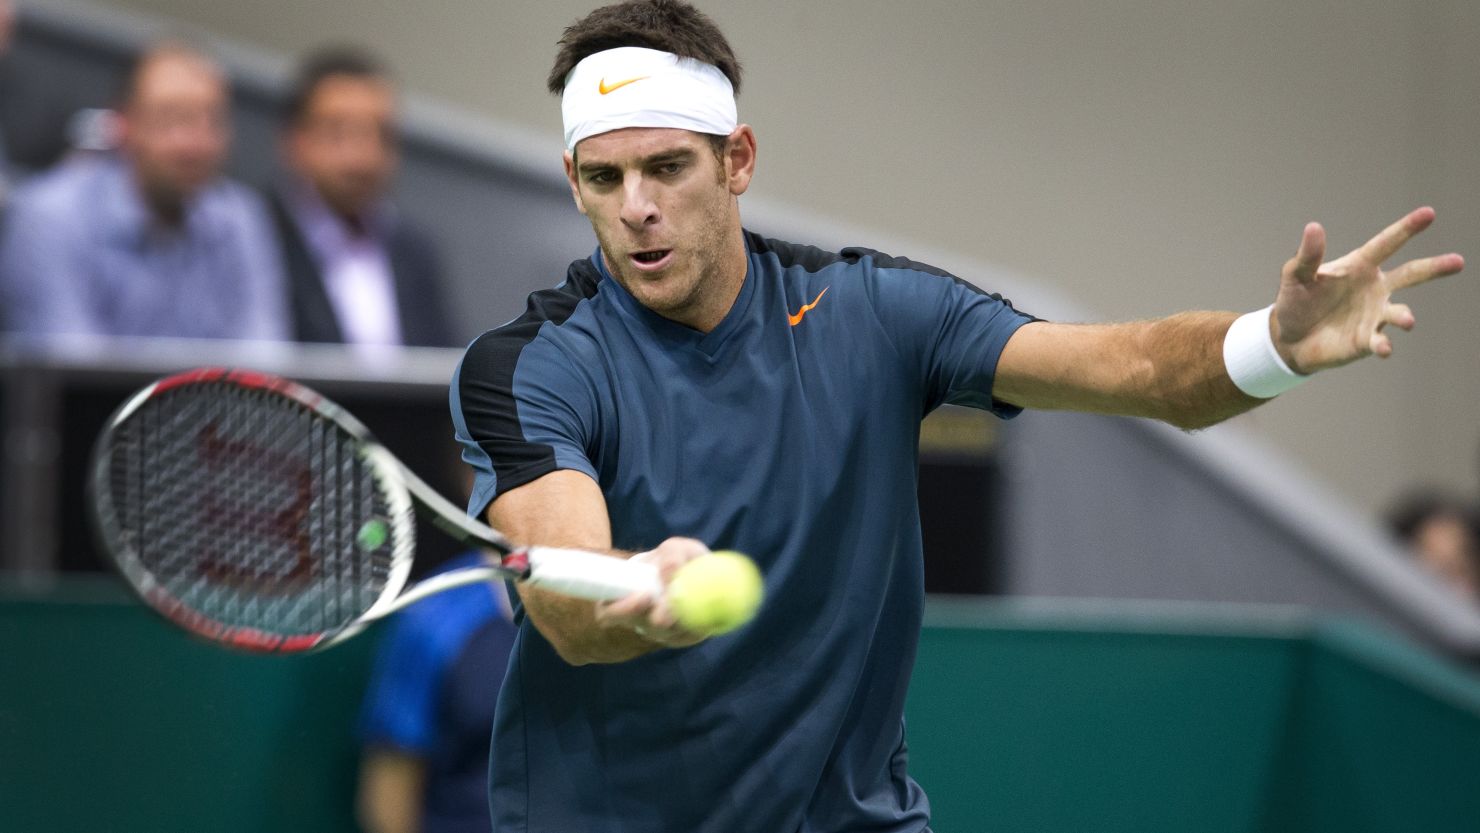 Juan Martin Del Potro defeated France's Julian Benneteau to clinch the title at the Rotterdam Open.